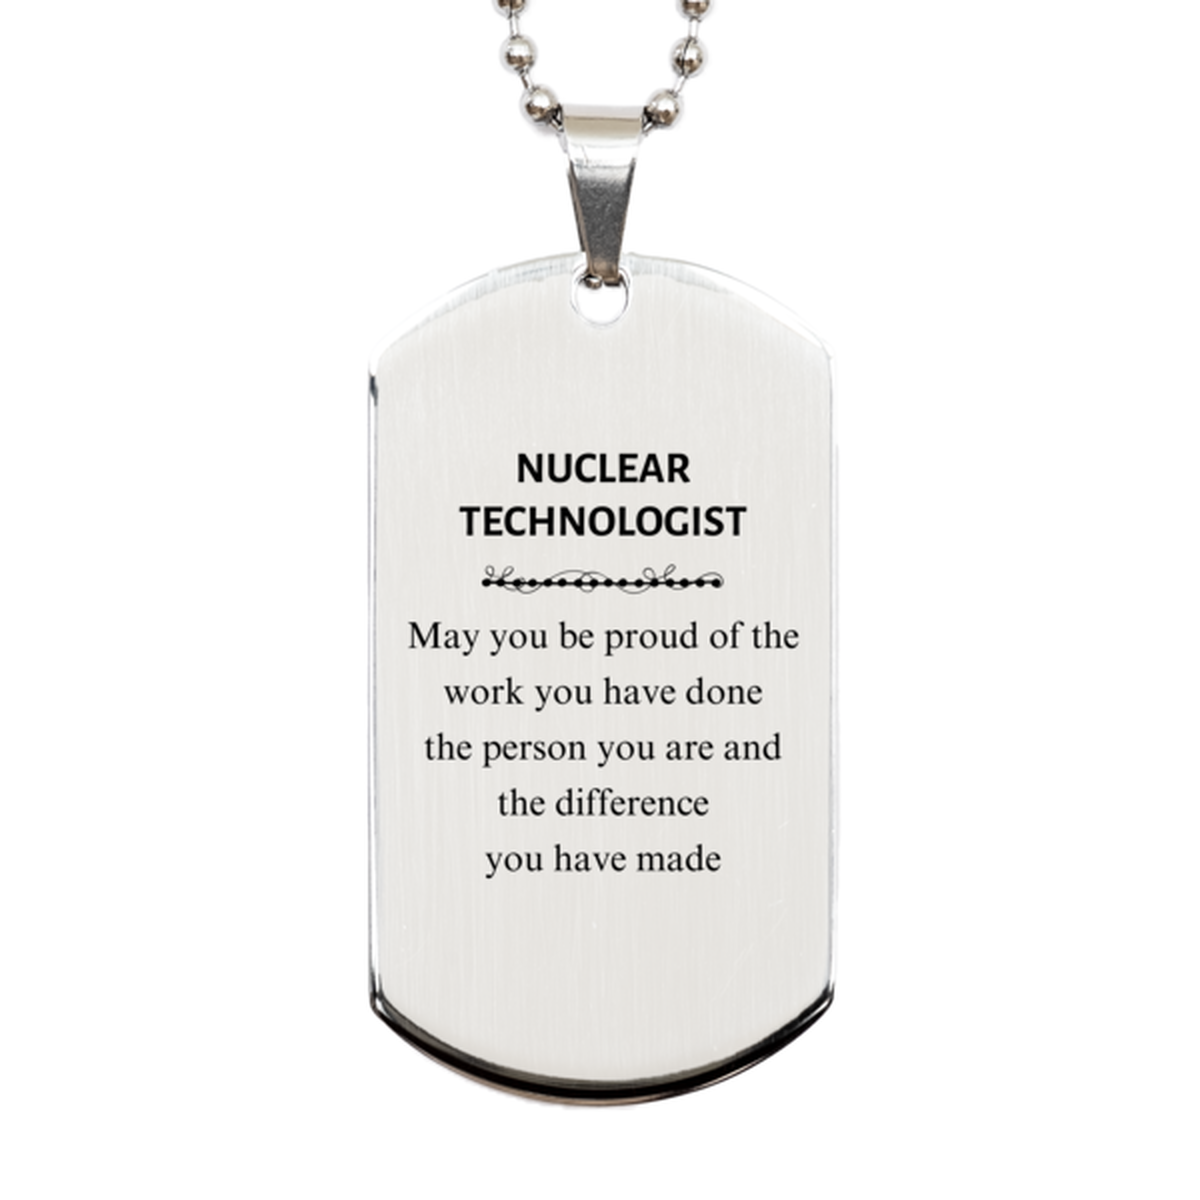 Nuclear Technologist May you be proud of the work you have done, Retirement Nuclear Technologist Silver Dog Tag for Colleague Appreciation Gifts Amazing for Nuclear Technologist